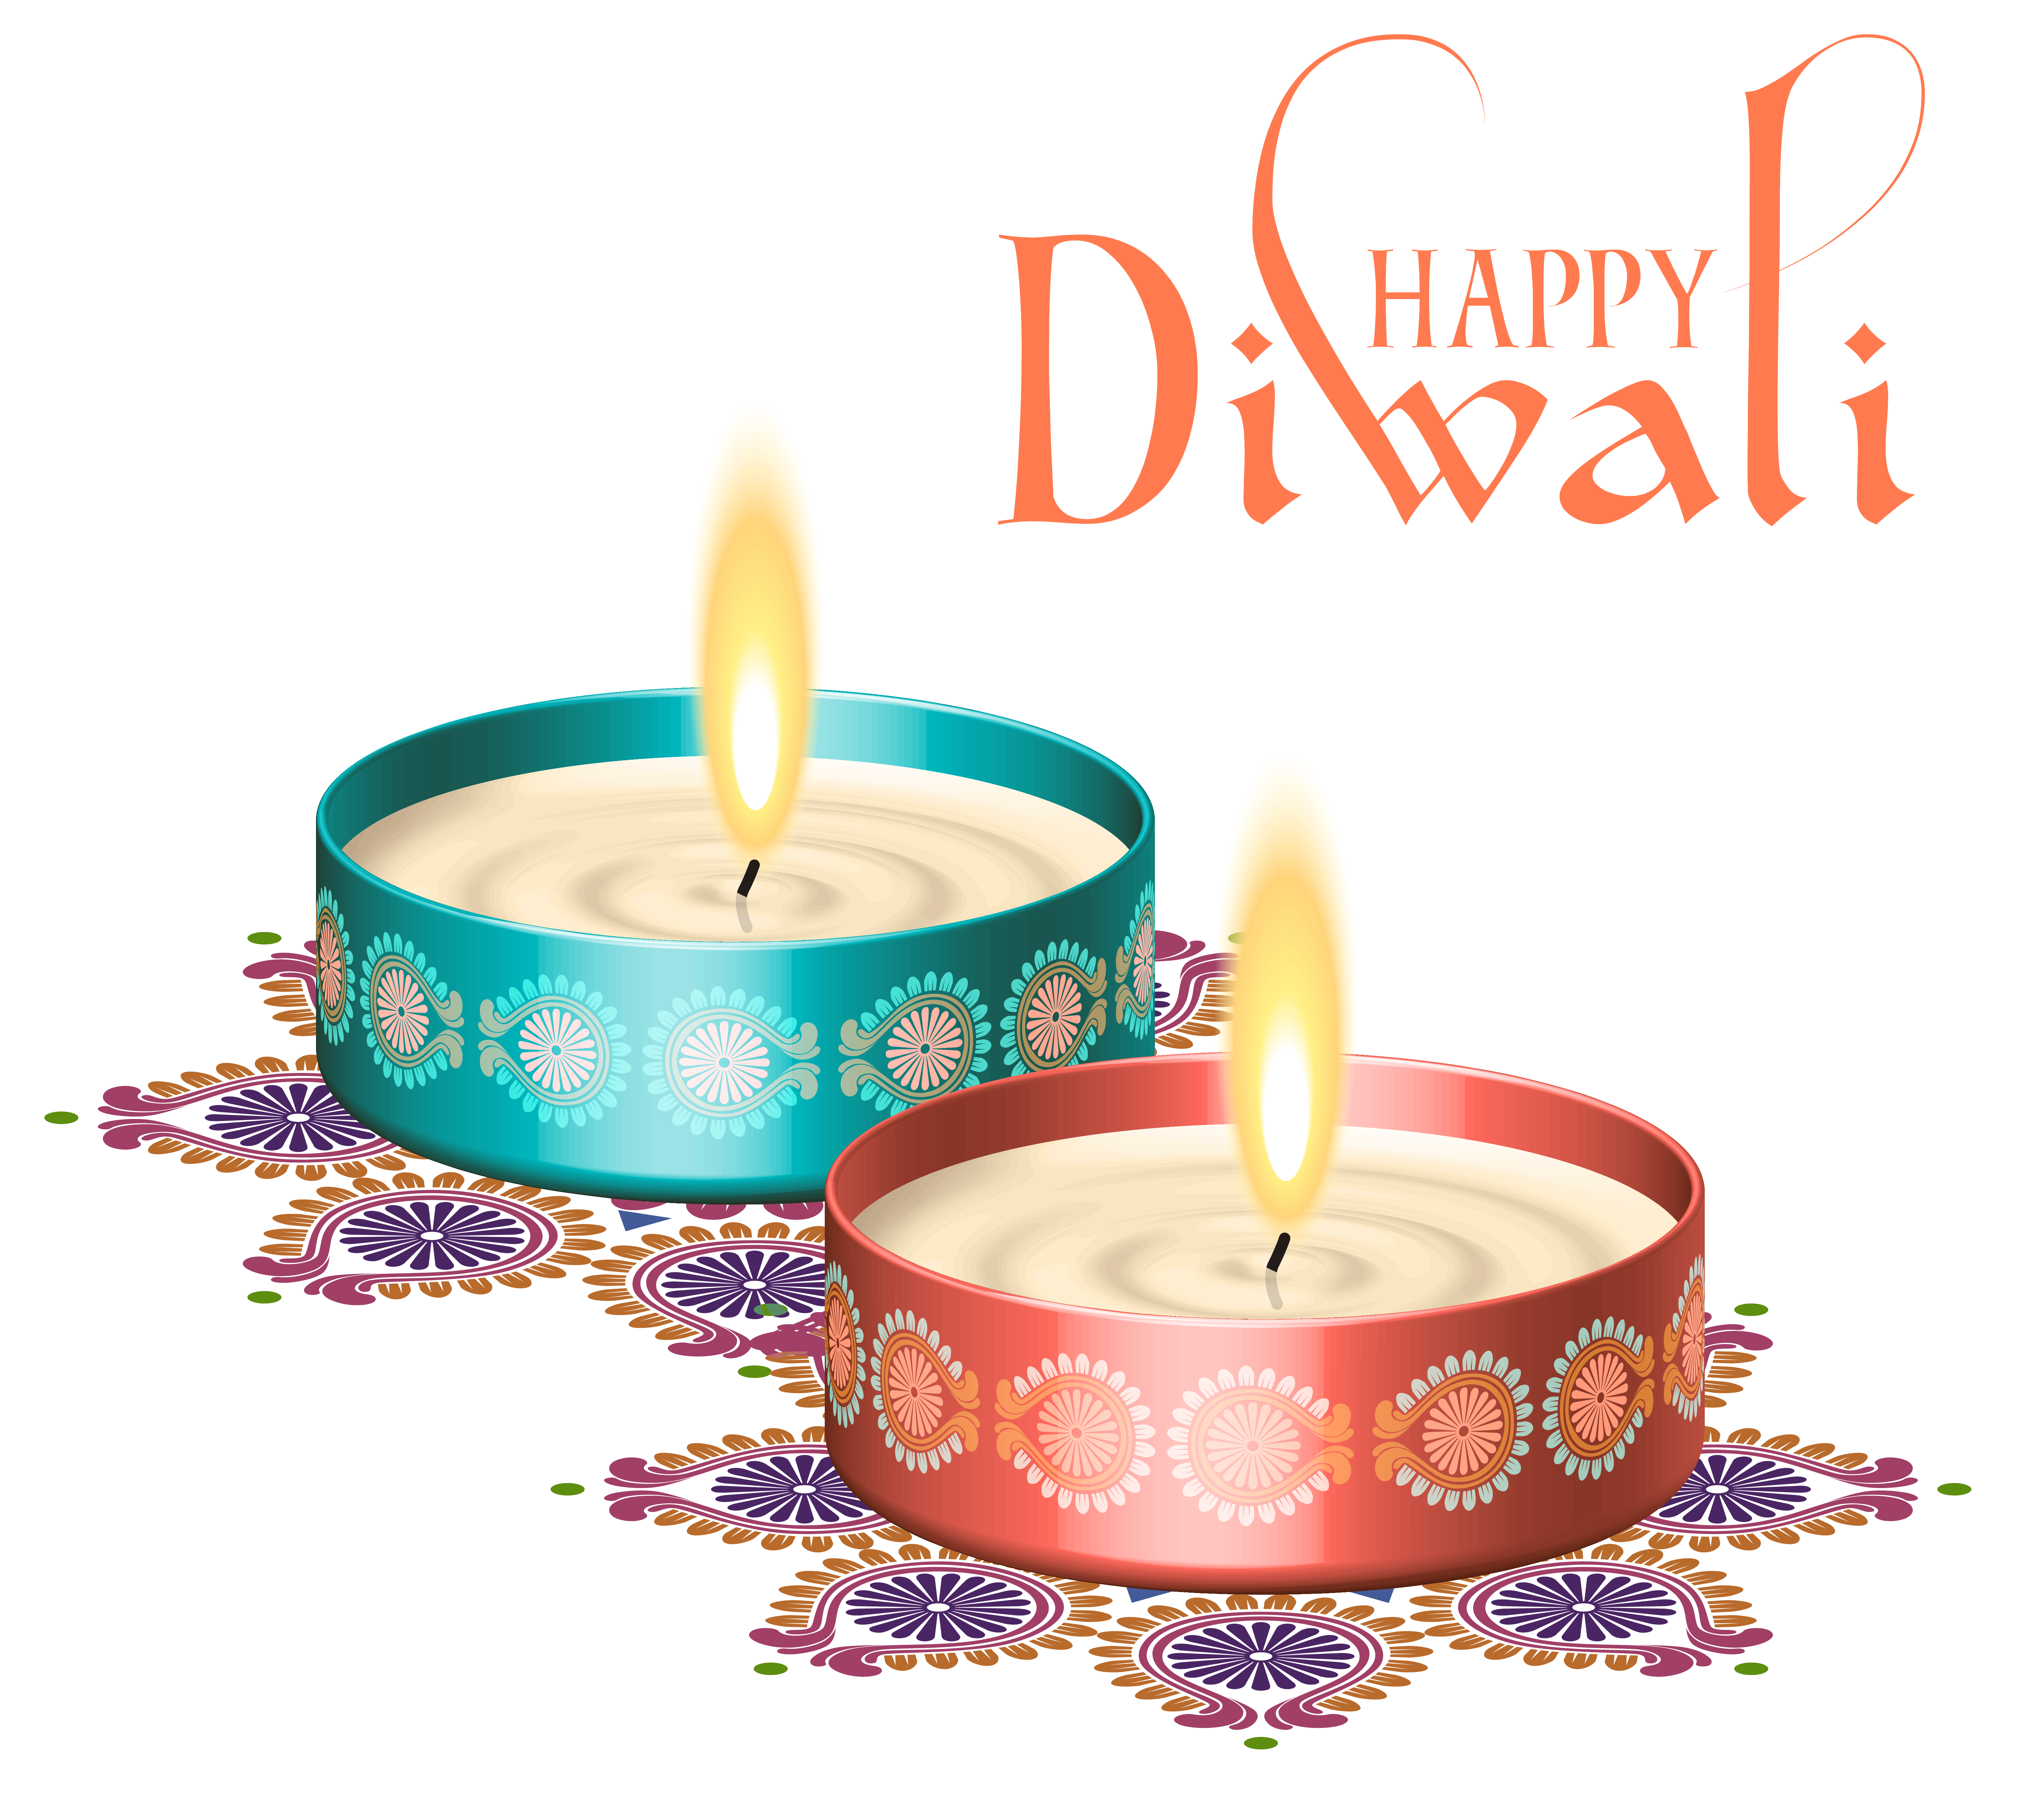 2018 clipart diwali. Happy nice candles png